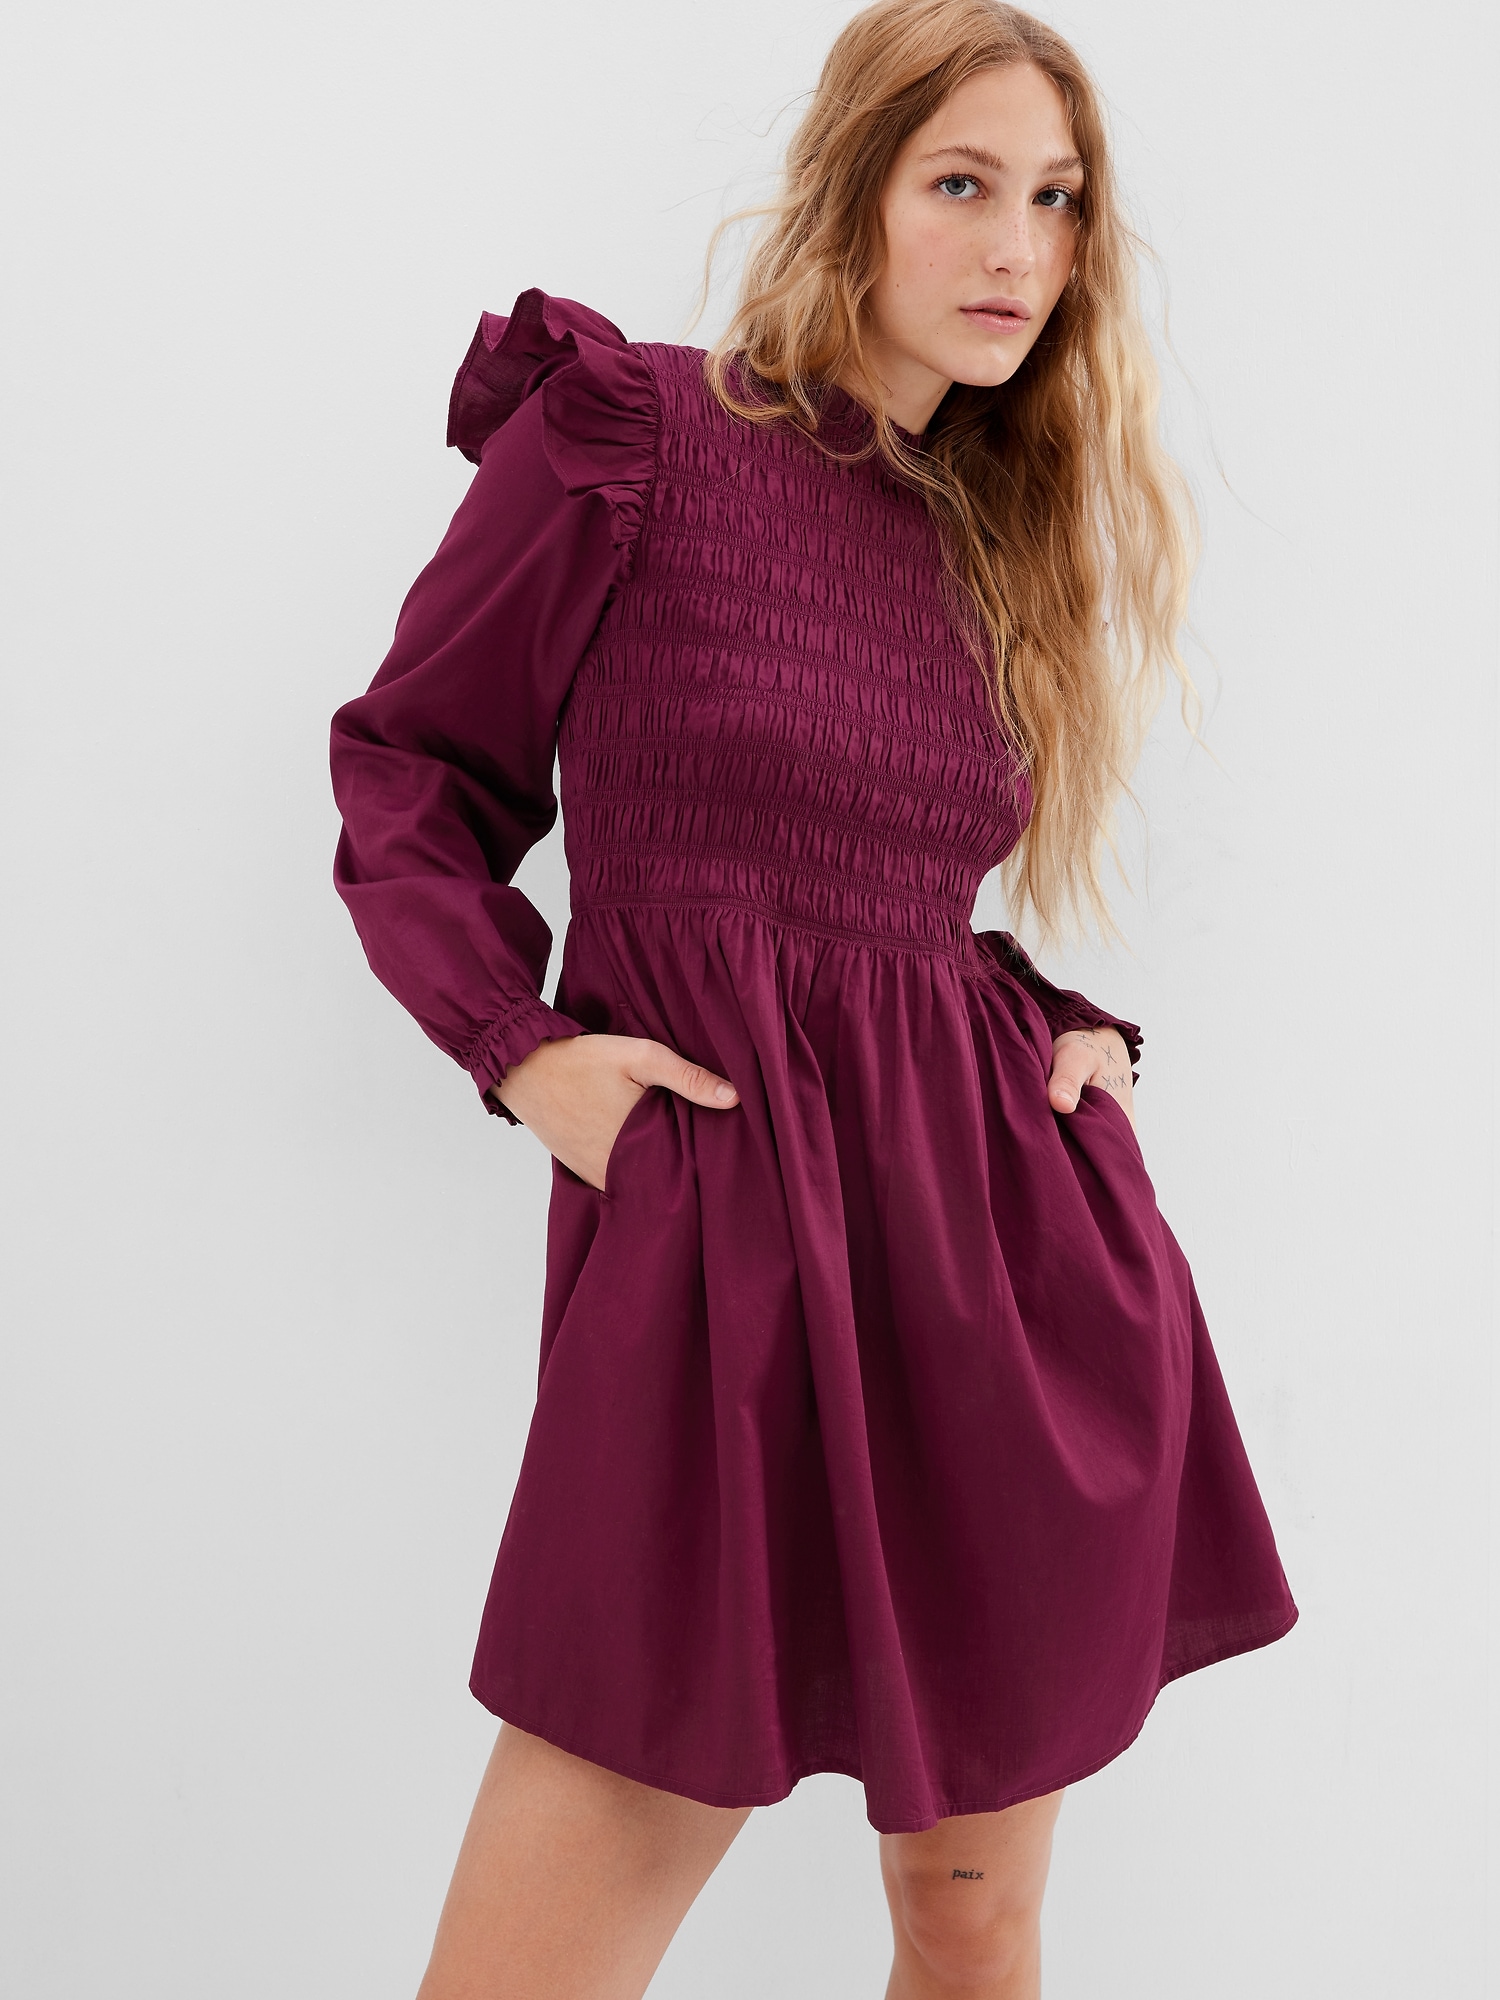 Lace Ruffle Dresses for Women - Up to 78% off